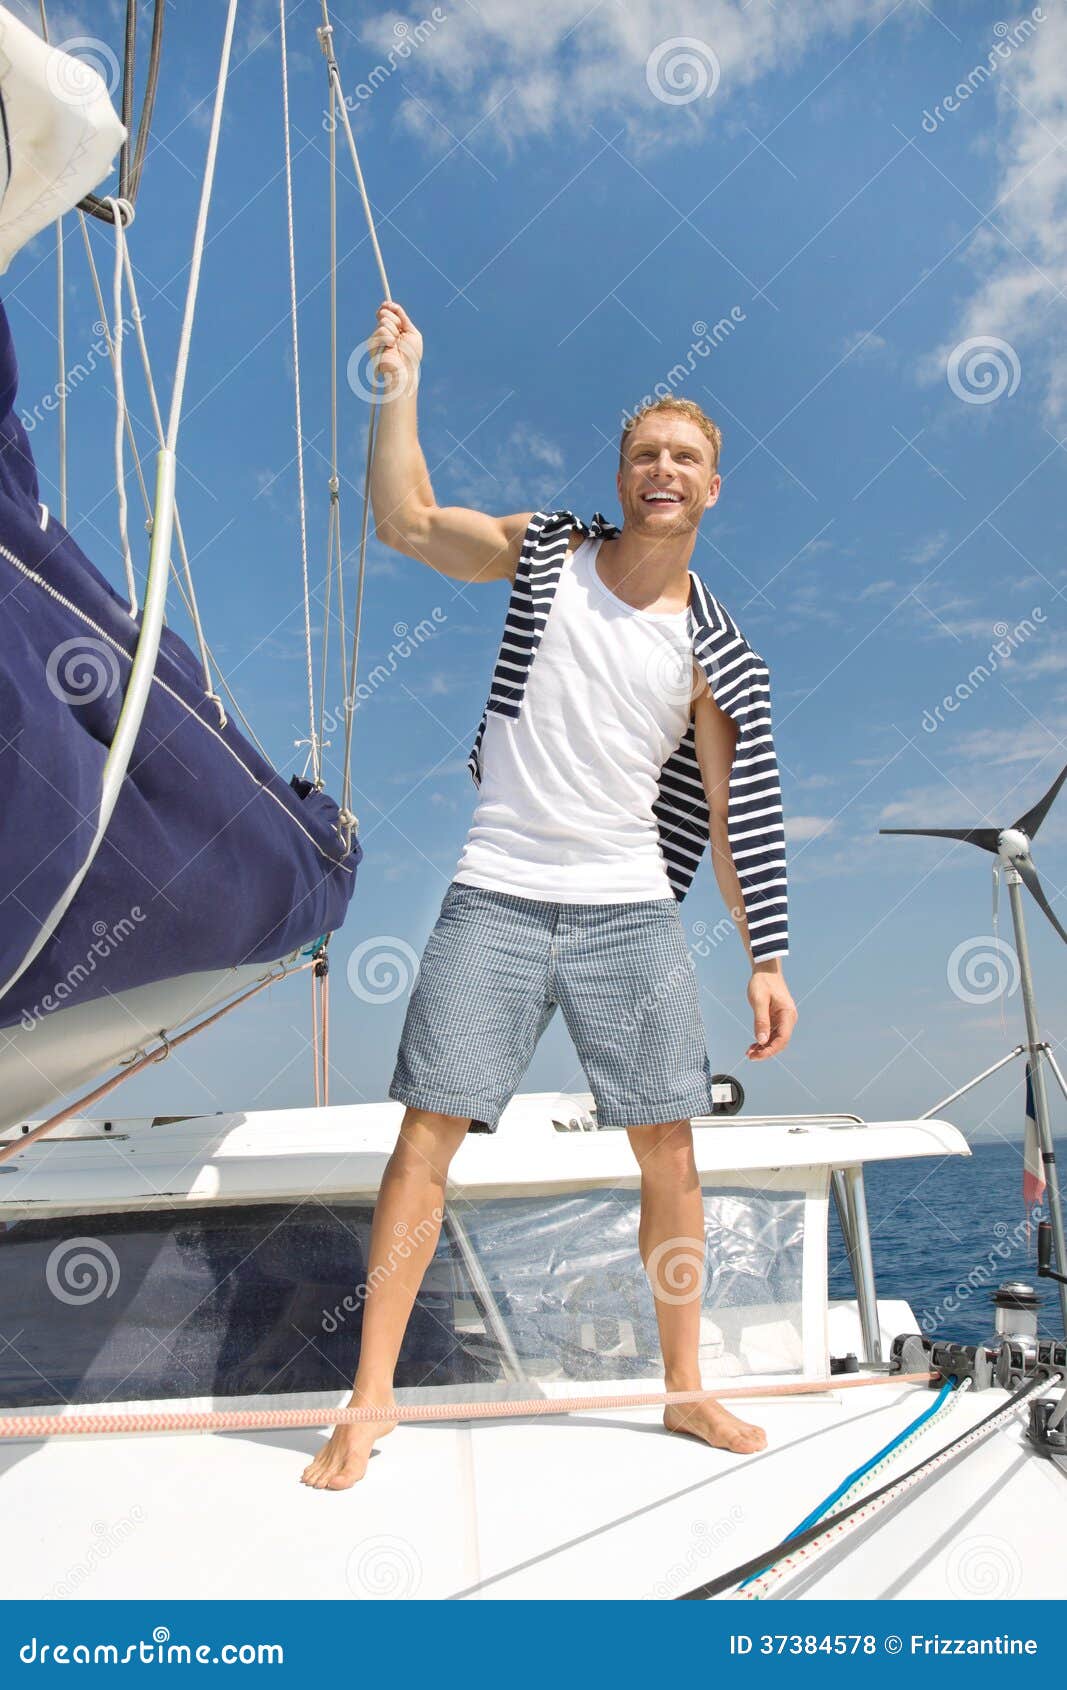 Blond Handsome Young Man On Sailing Boat. Stock Photo 